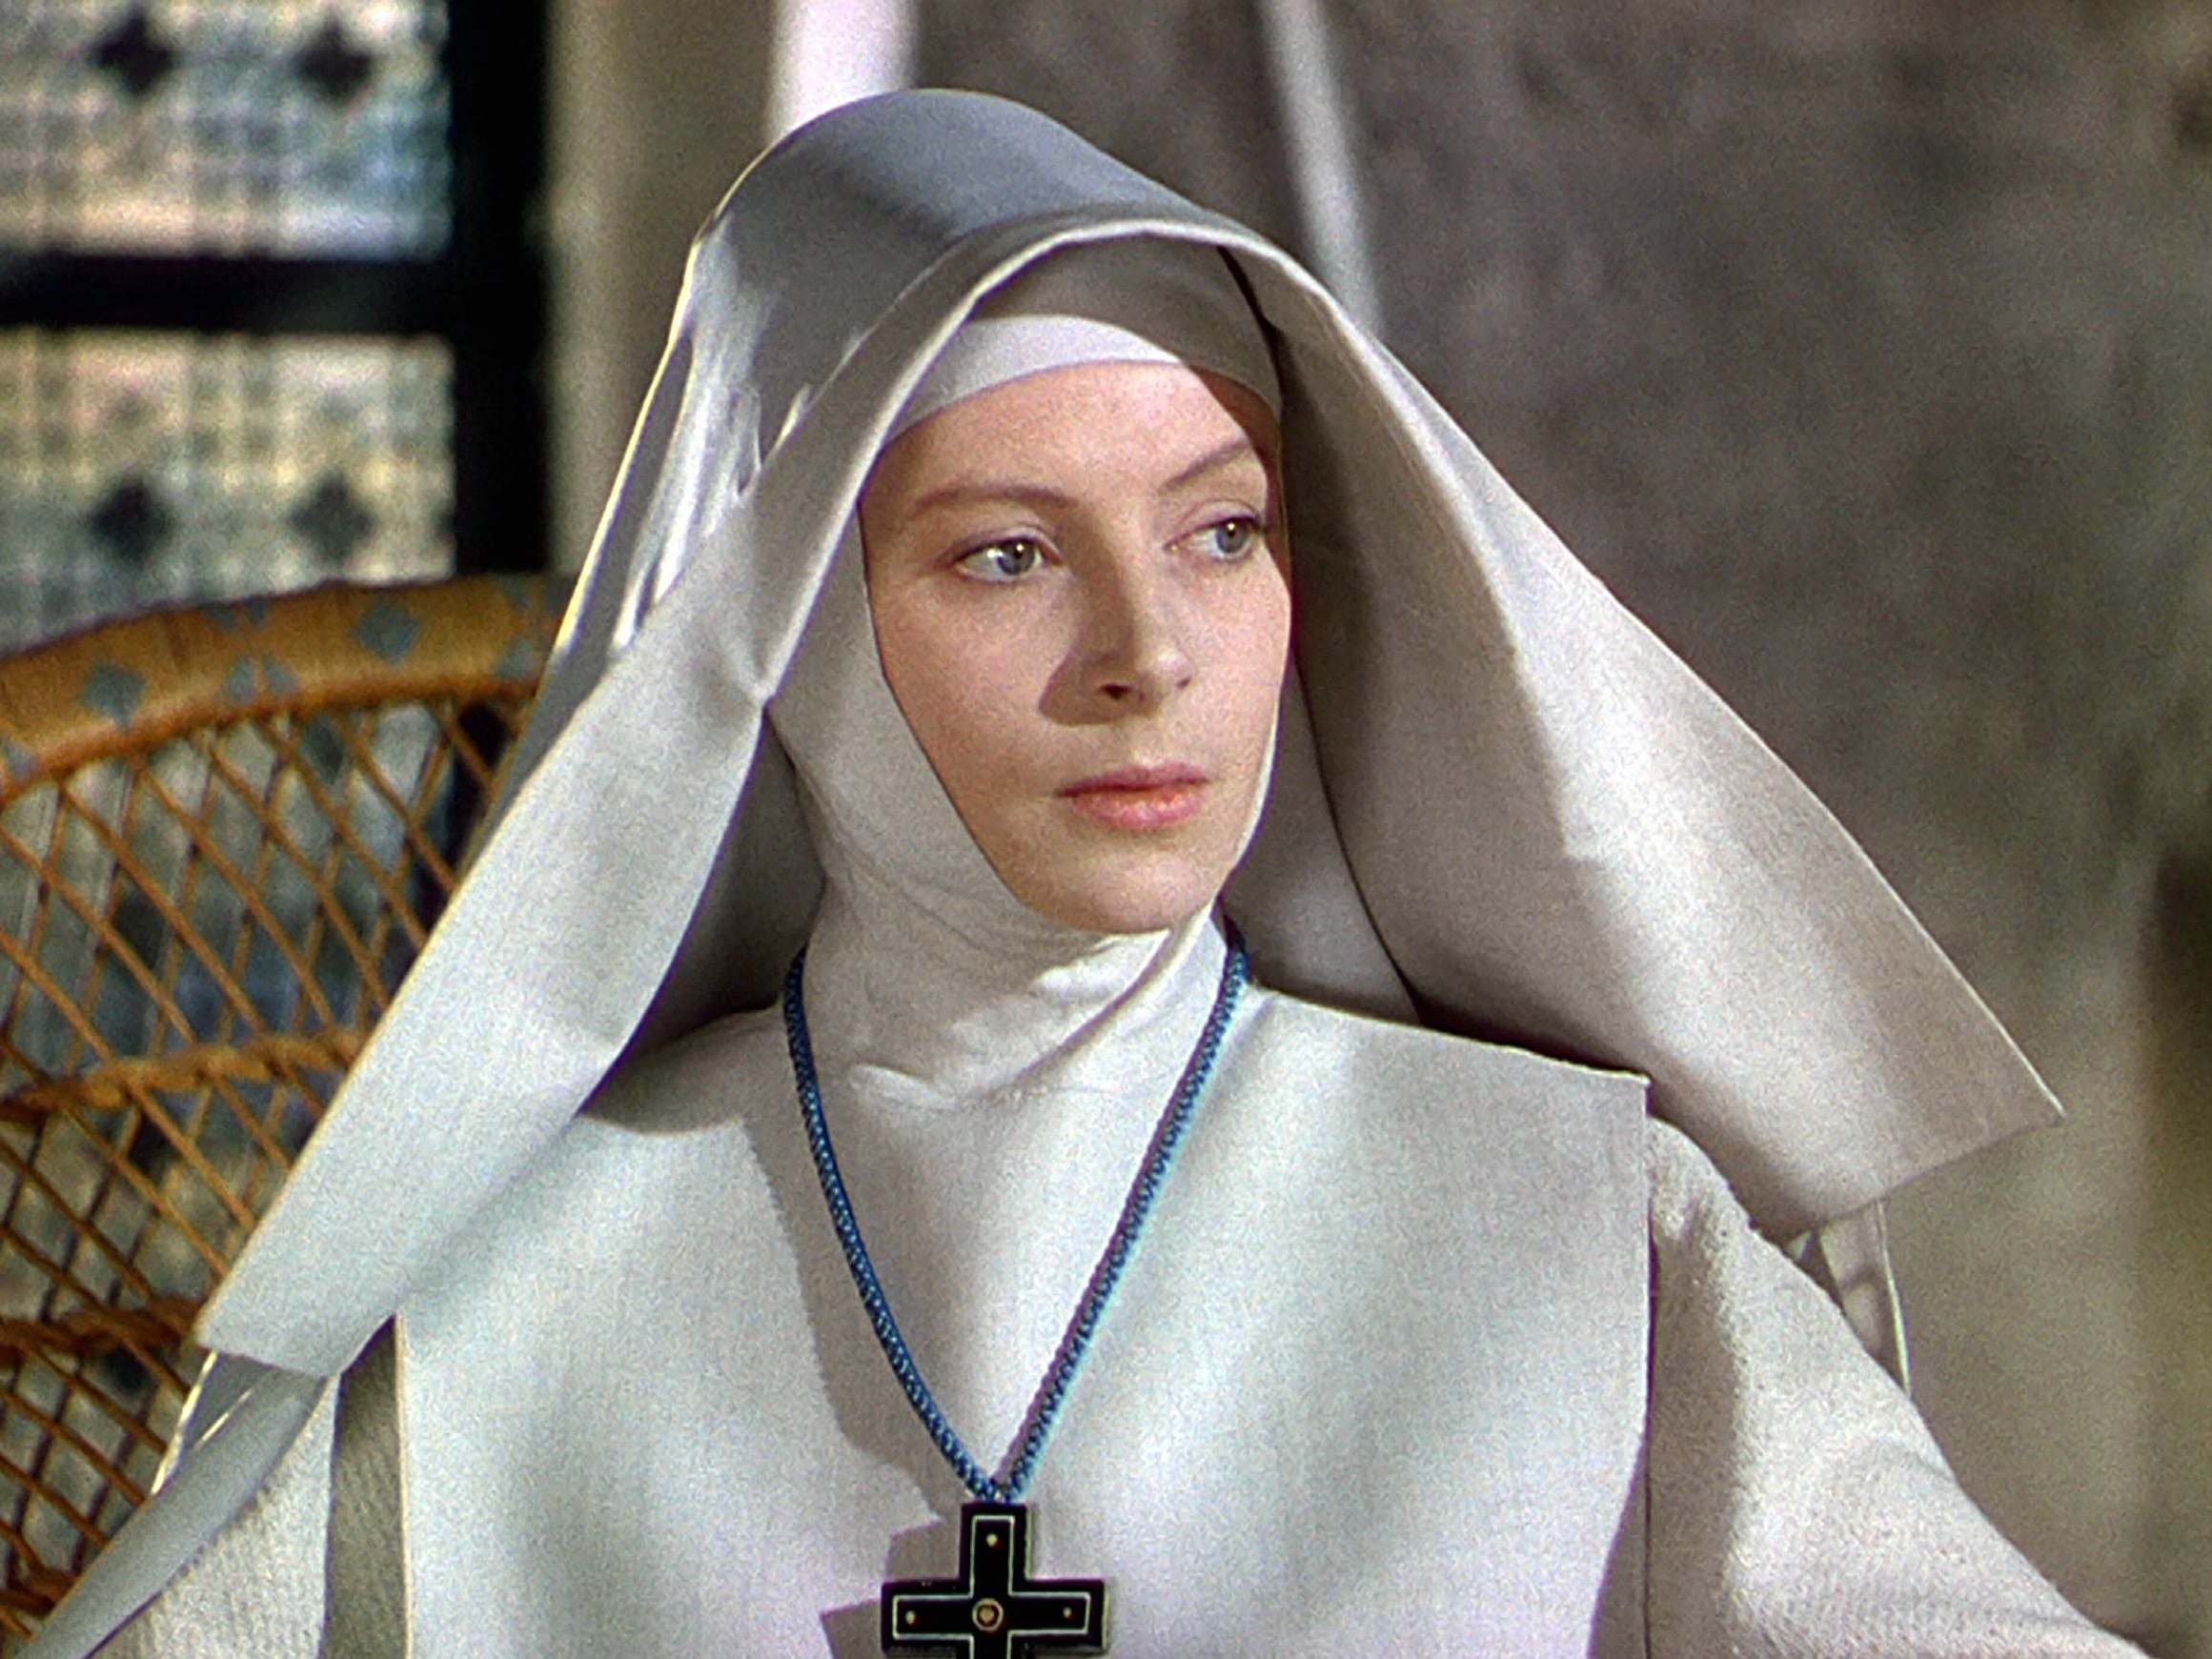 As Sister Clodagh, Deborah Kerr’s sharp, thin features melt into dreamlike serenity – it’s one of her greatest performances